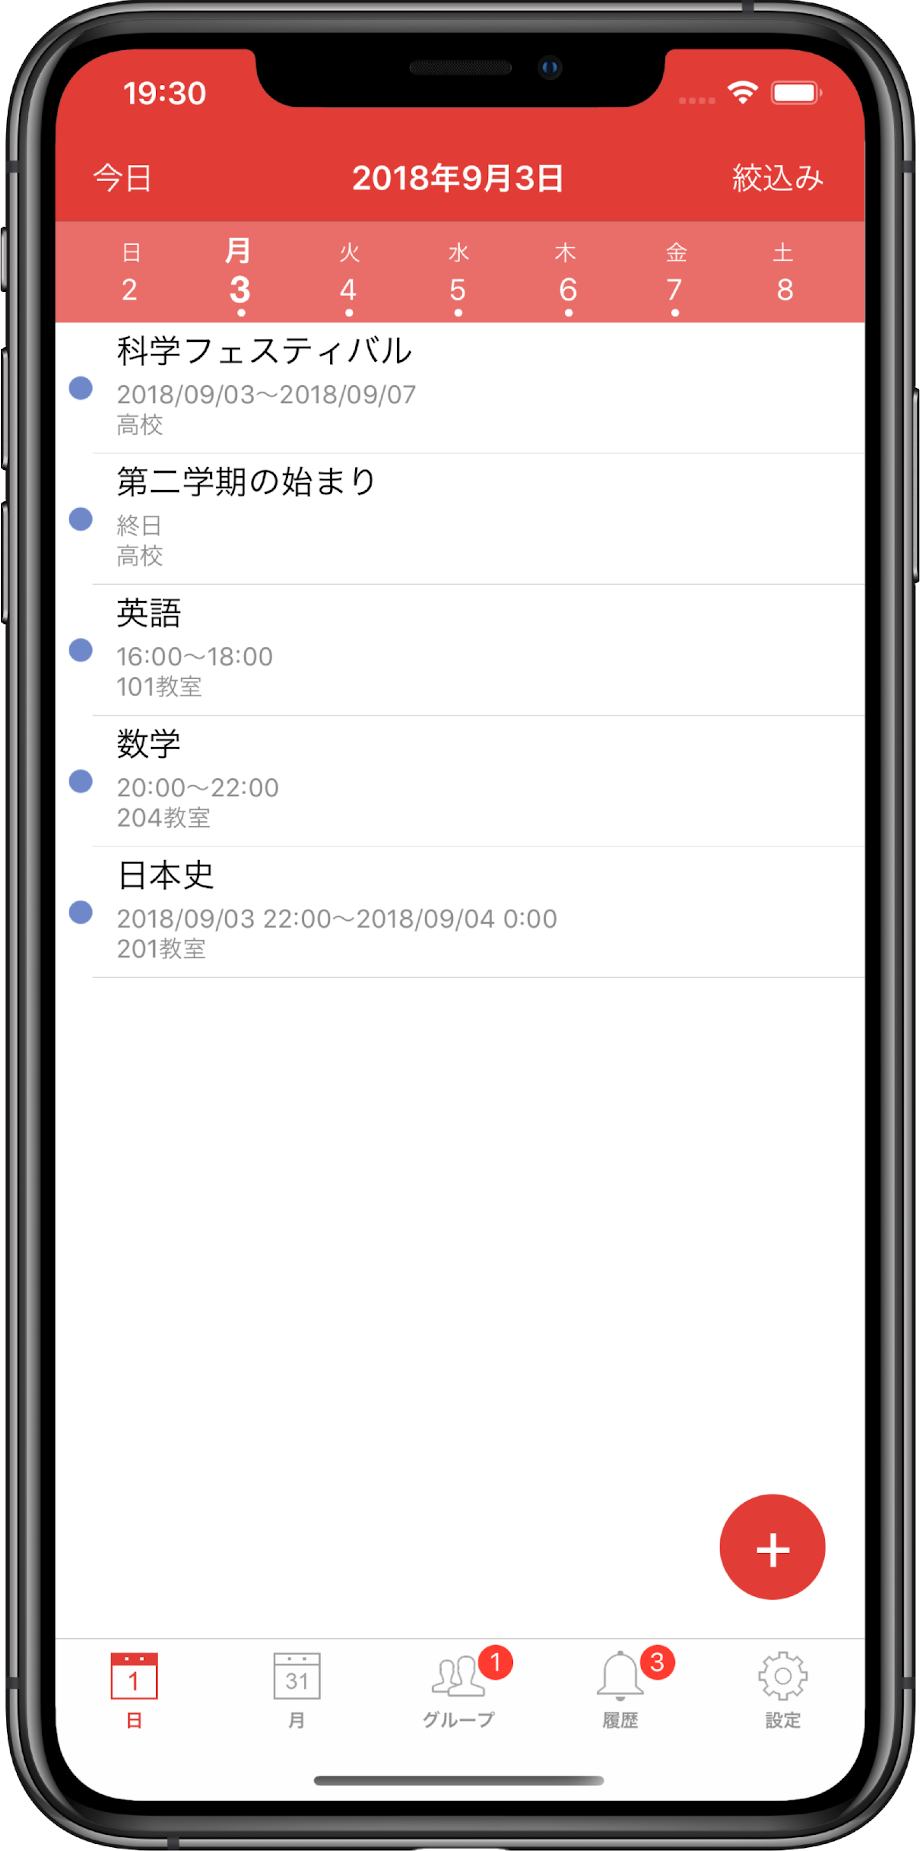 iPhone XS Max上のHiCal